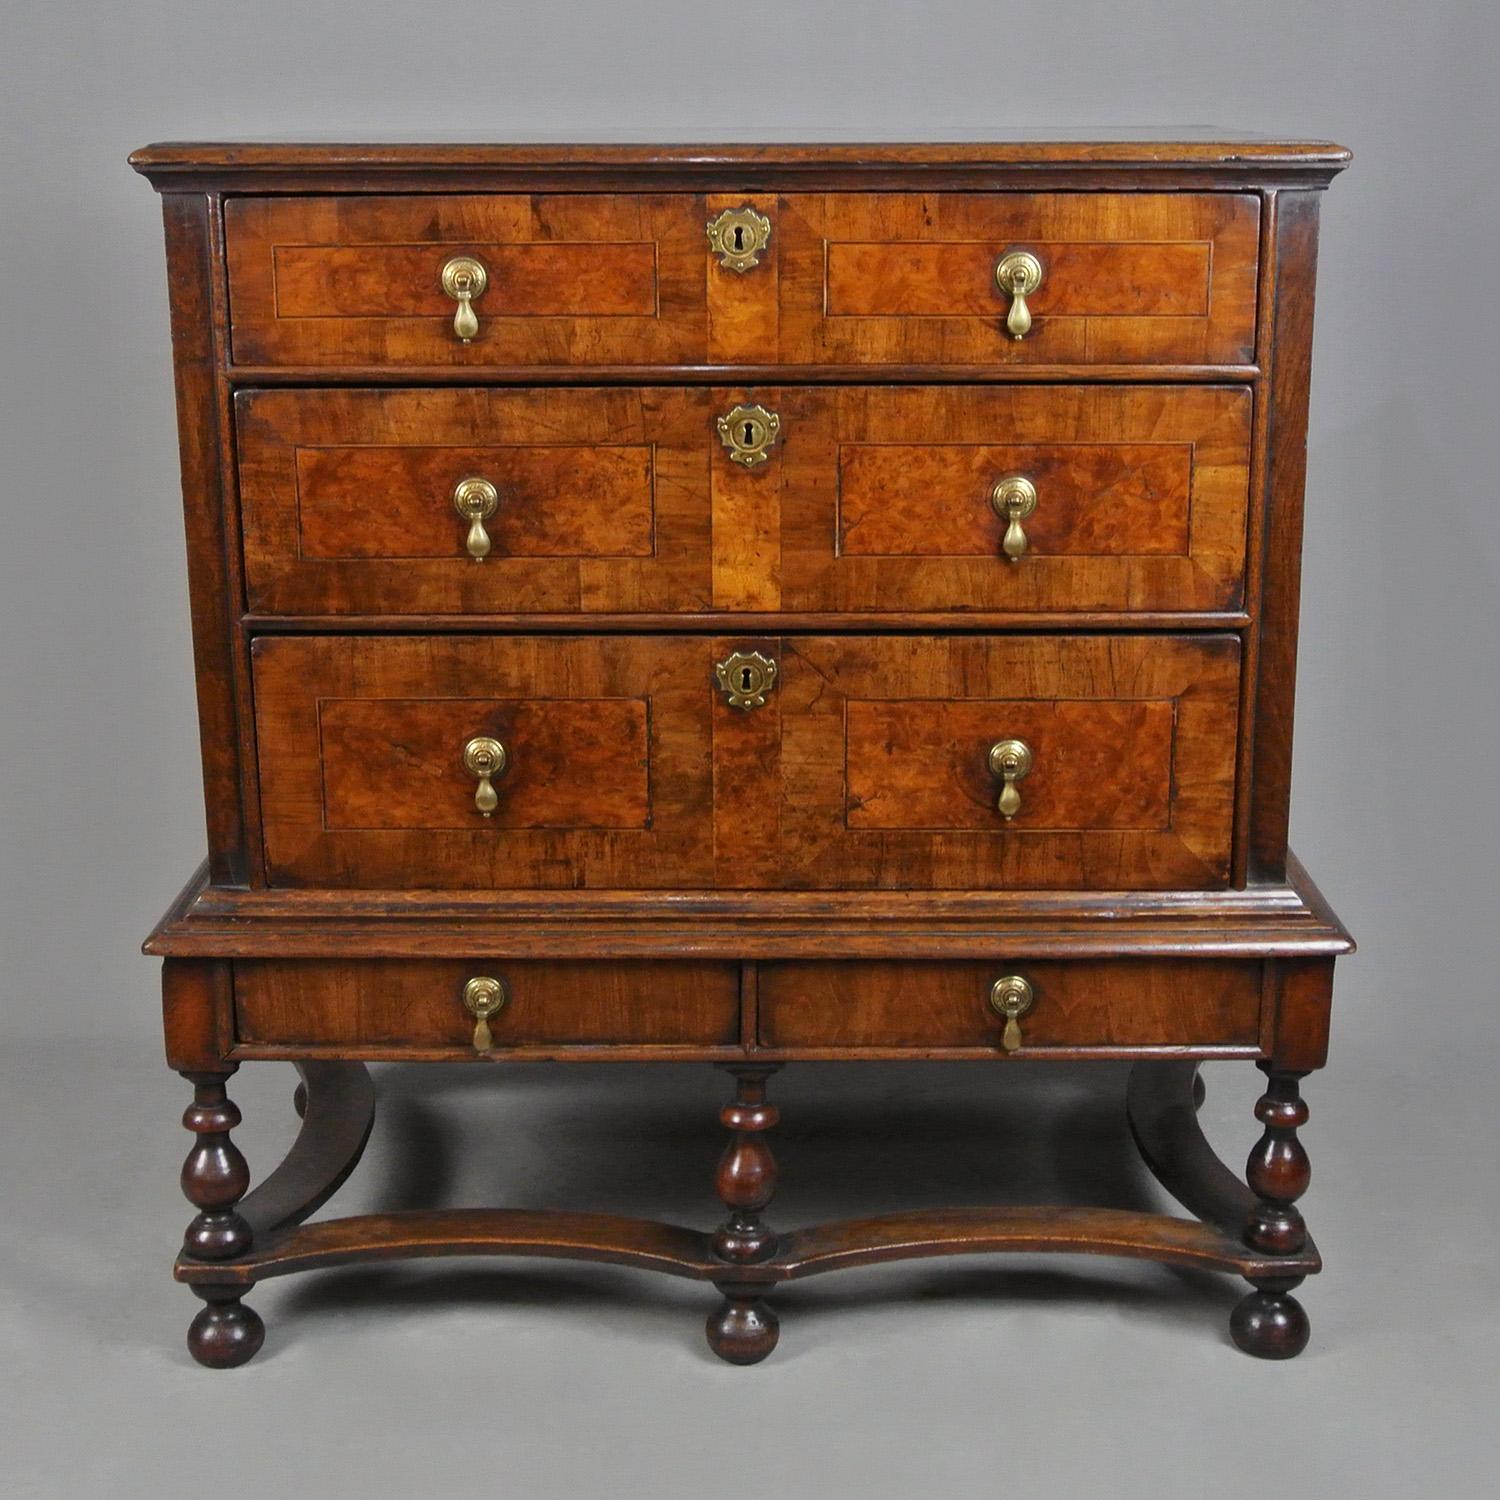 A truly wonderful William and Mary Oak and Walnut chest on original stand, completely original including brass drop handles, engraved back plates, locks and escutcheons.   

Of a small size, perfectly proportioned, and with a fantastic colour and